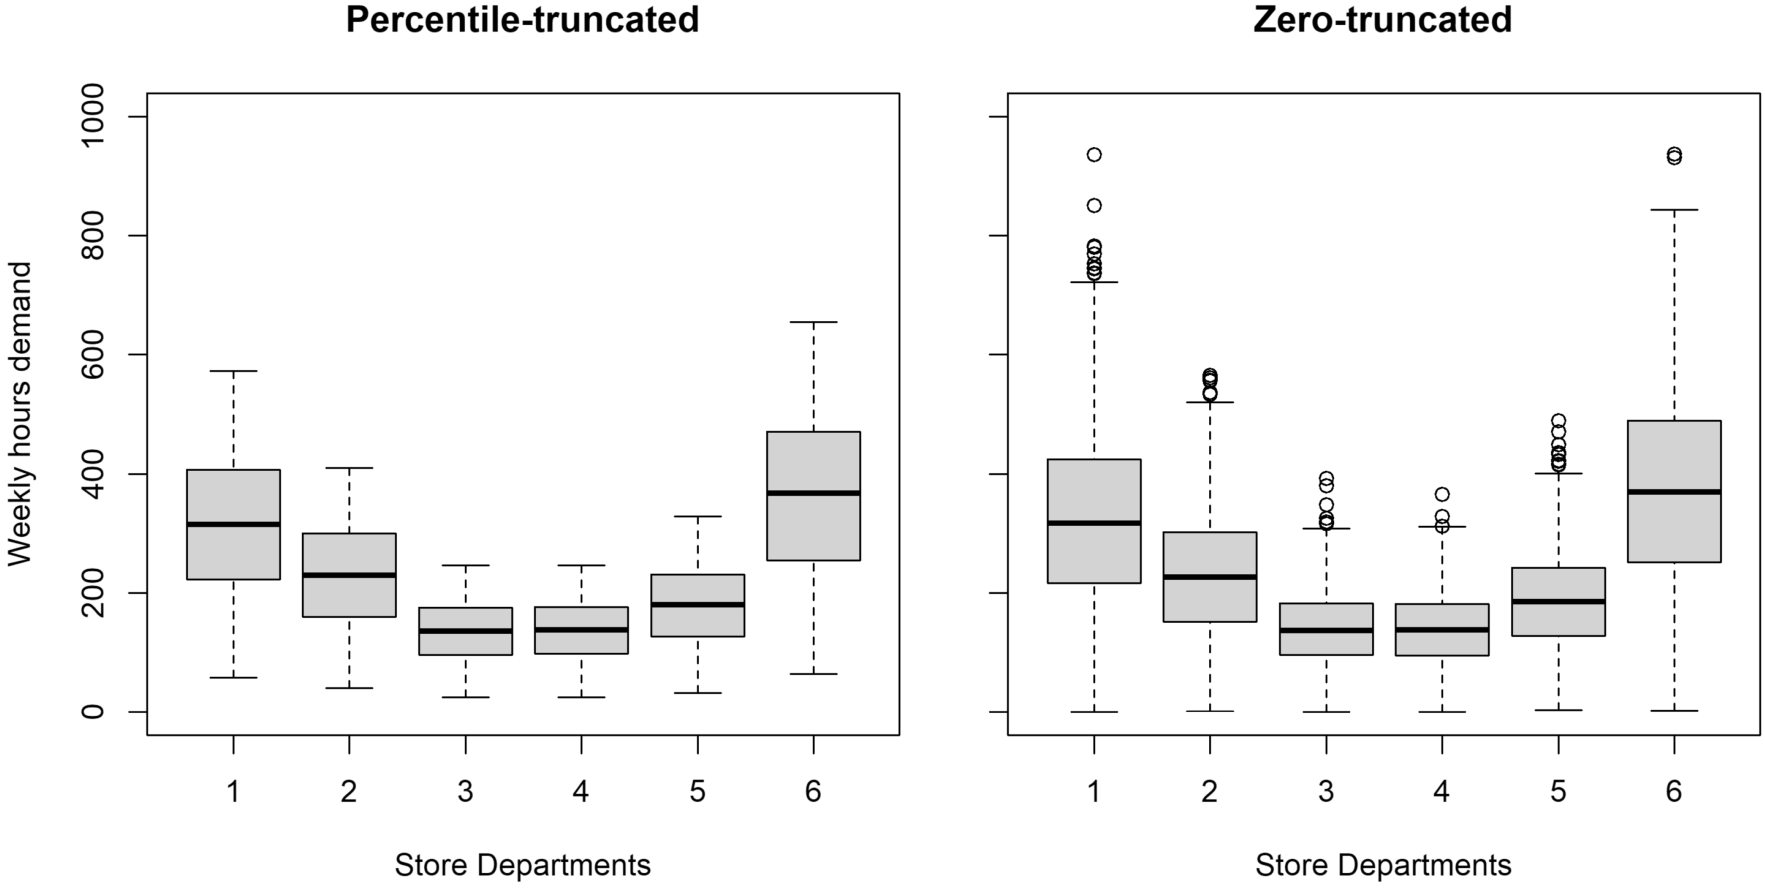 Percentile-truncated vs zero-truncated, with a coefficient of variation of 50% in the 6 store departments.